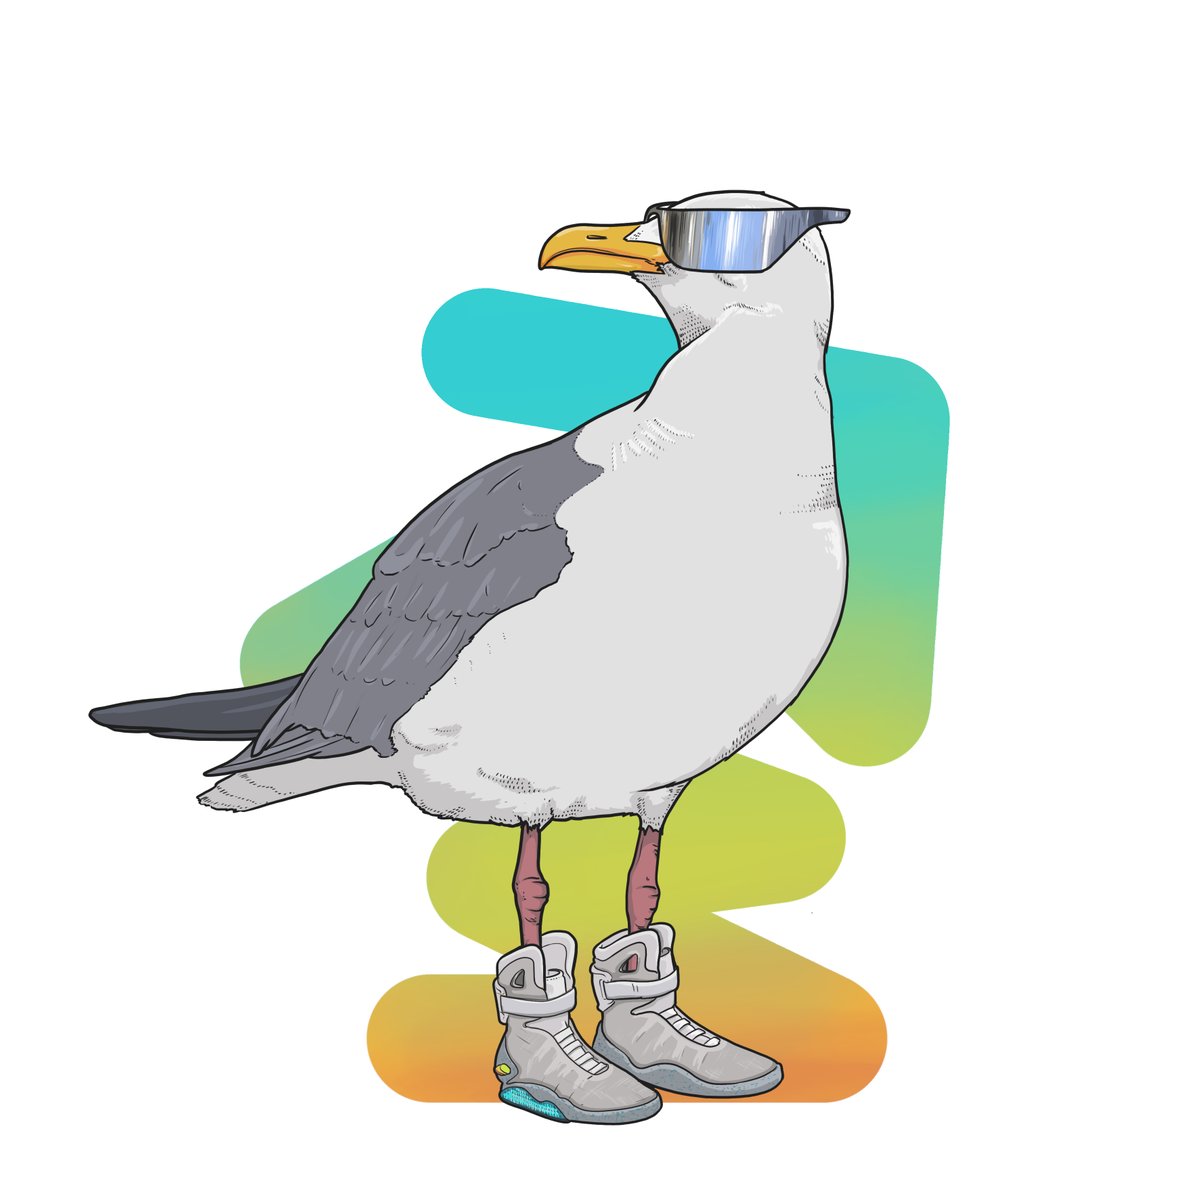 crypto_seagulls tweet picture